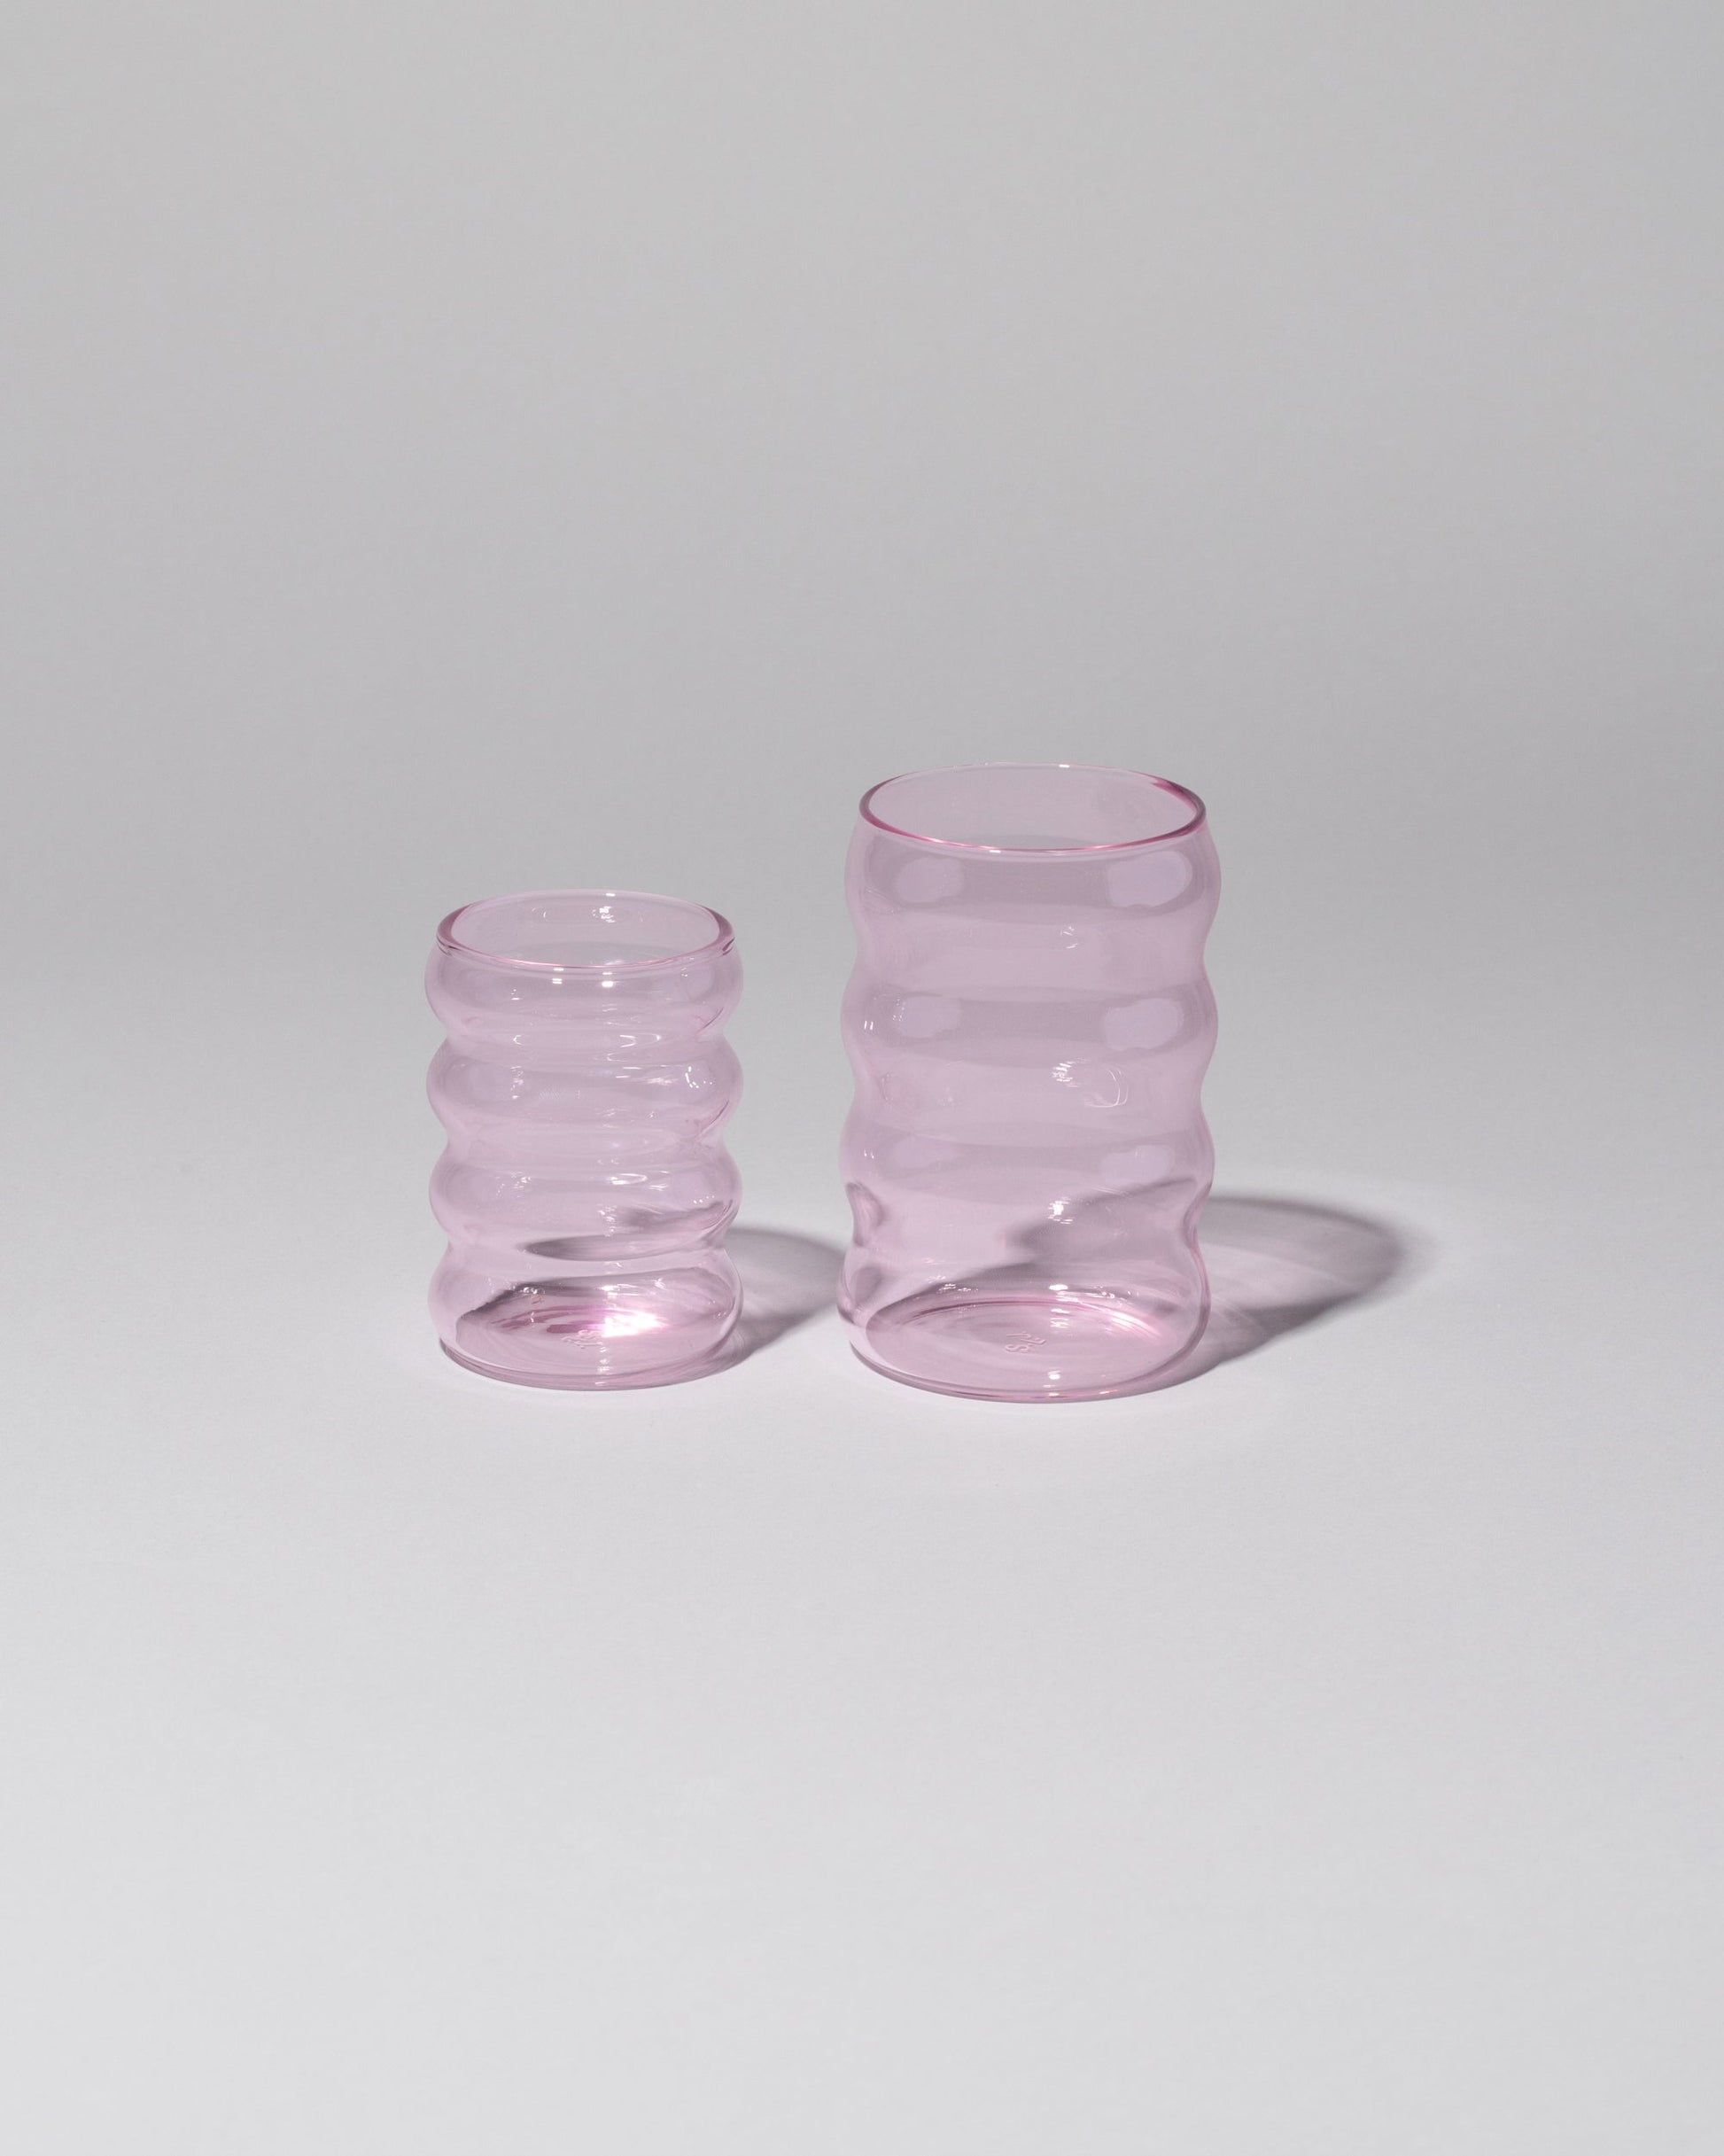 Group of Sophie Lou Jacobsen Small Pink and Large Pink Single Ripple Cups on light color background.